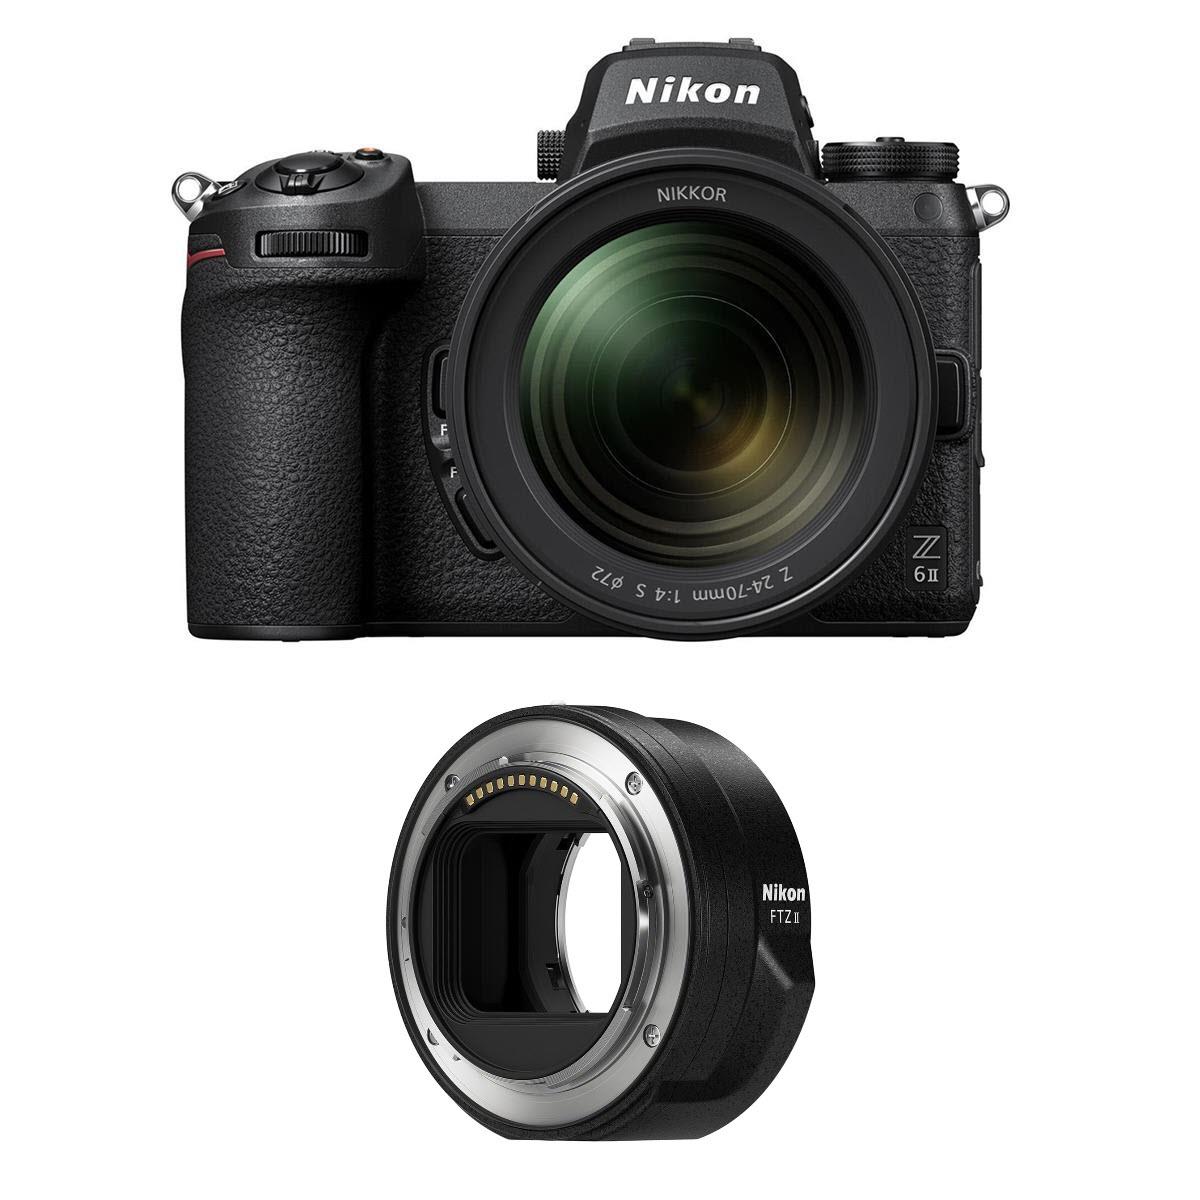 Image of Nikon Z 6II Mirrorless Camera with 24-70mm f/4 Lens and FTZ II Mount Adapter